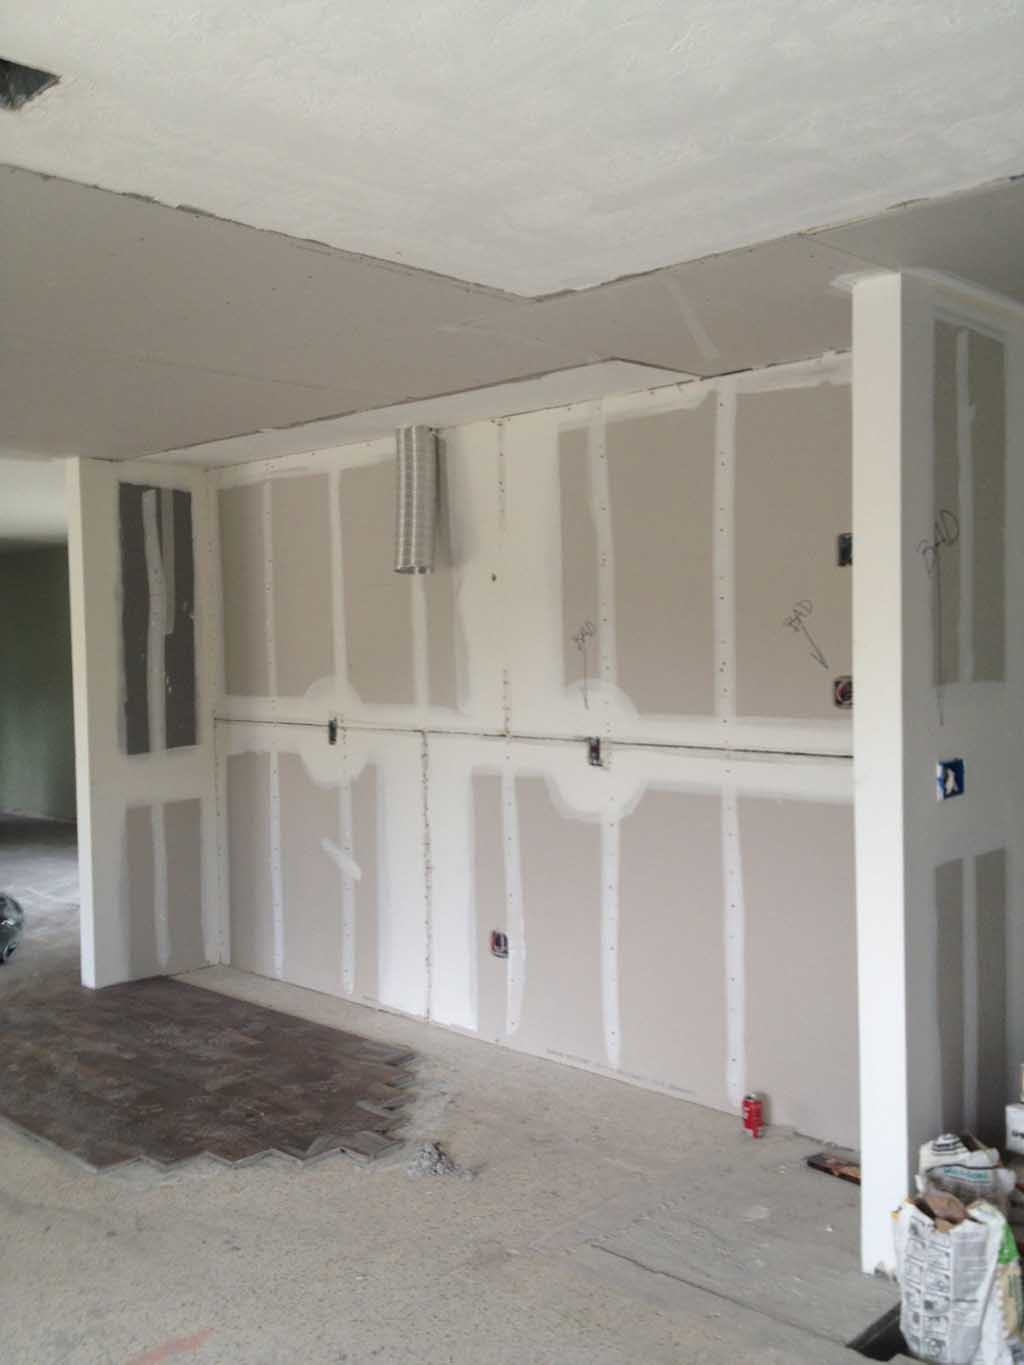 Open kitchen layout in progress with new drywall installed